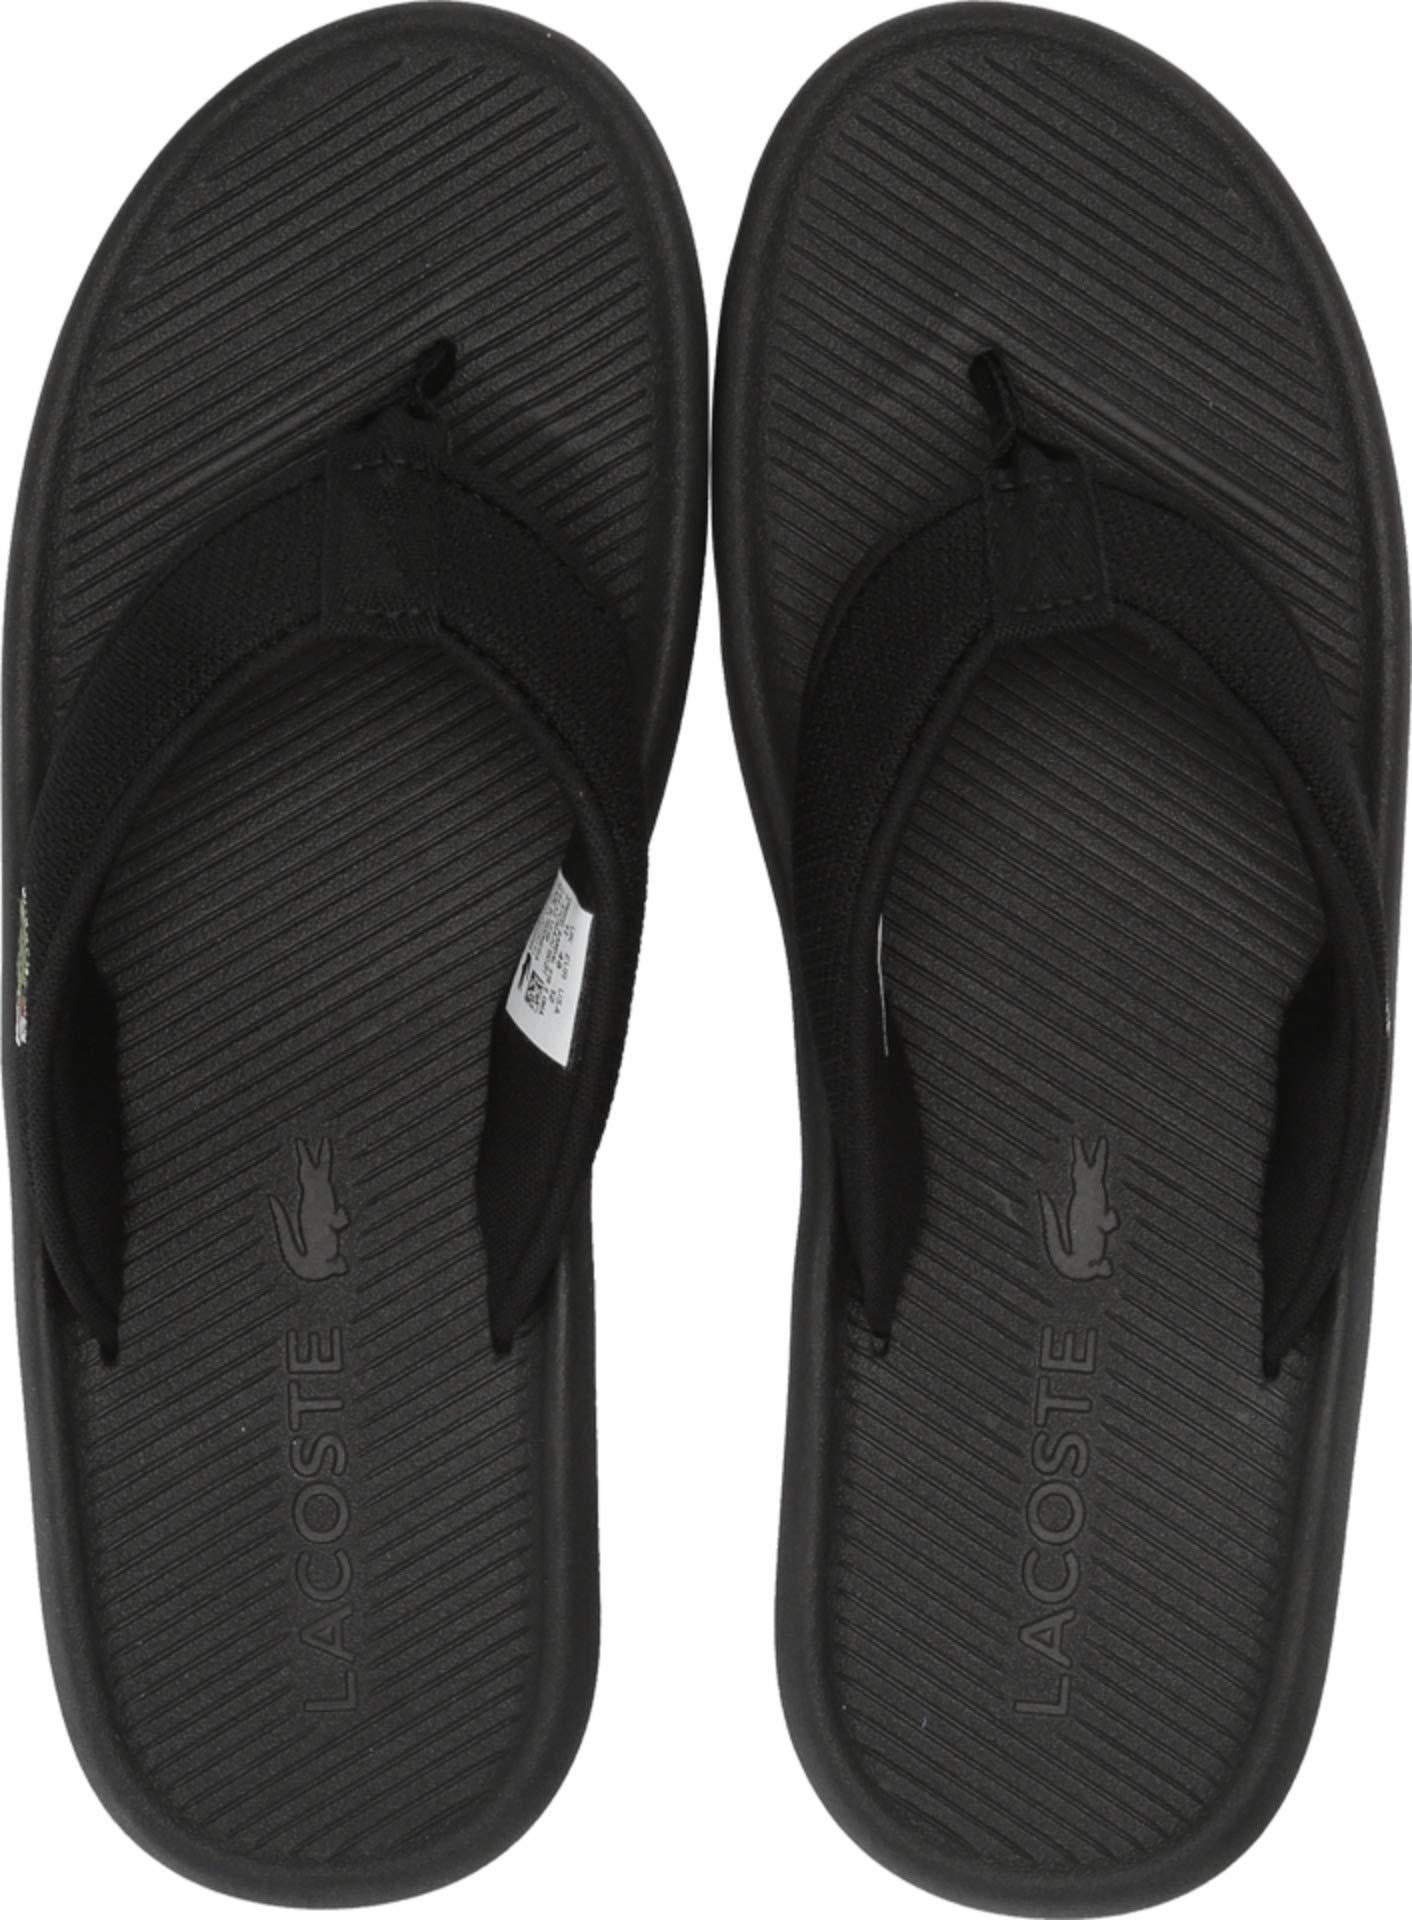 Lacoste Synthetic Croco Sandal in Black 